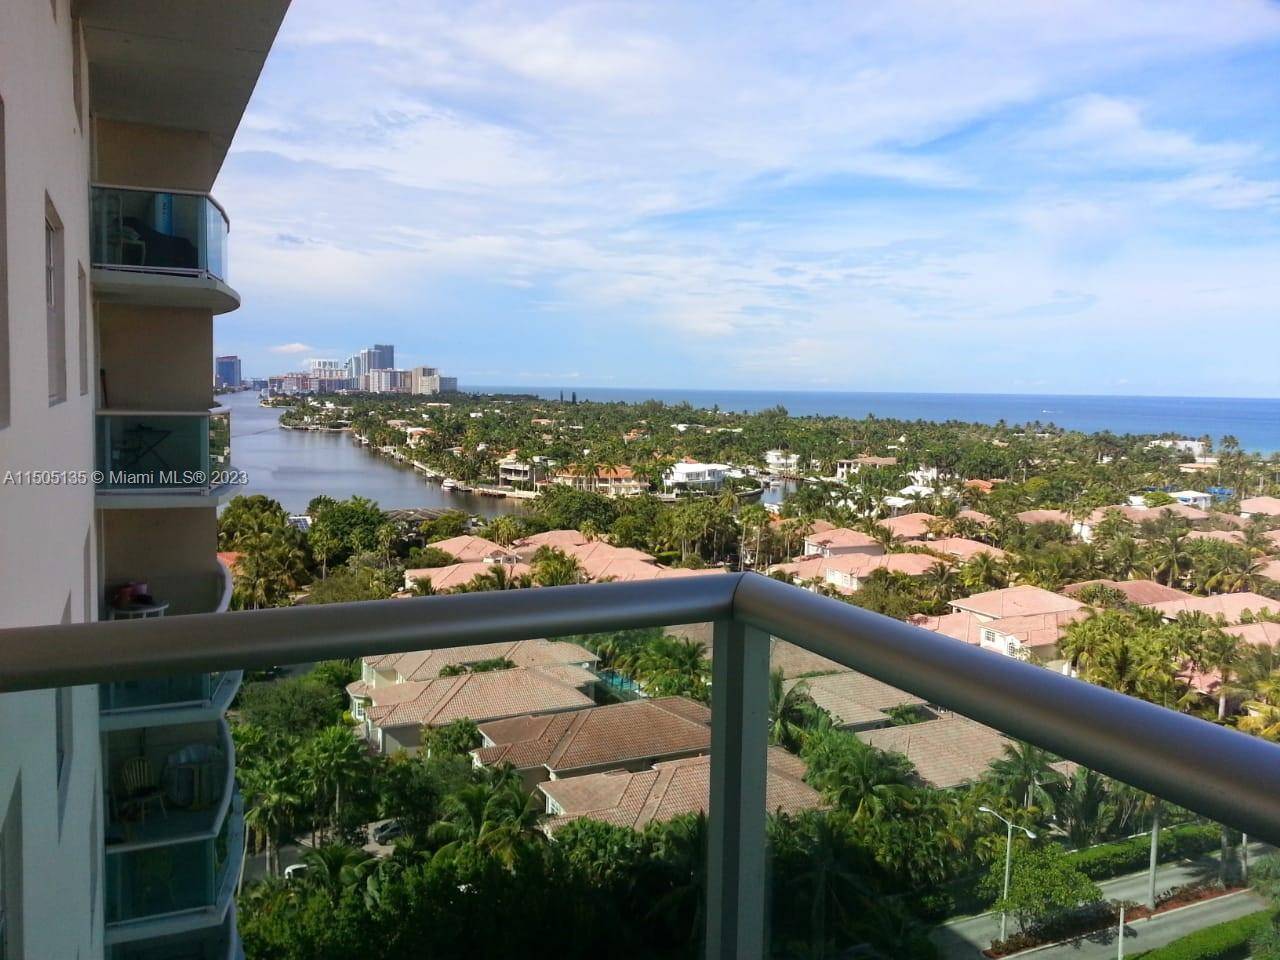 BEAUTIFUL 1 bed 1 1 2 BATHS IN PRESTIGIOUS SUNNY ISLES BEACH, WATERFRONT, PROPERTY FACING INTRACOASTAL, THE VIEW FROM THE BALCONYIS SPECTACULAR AND RELAXING.